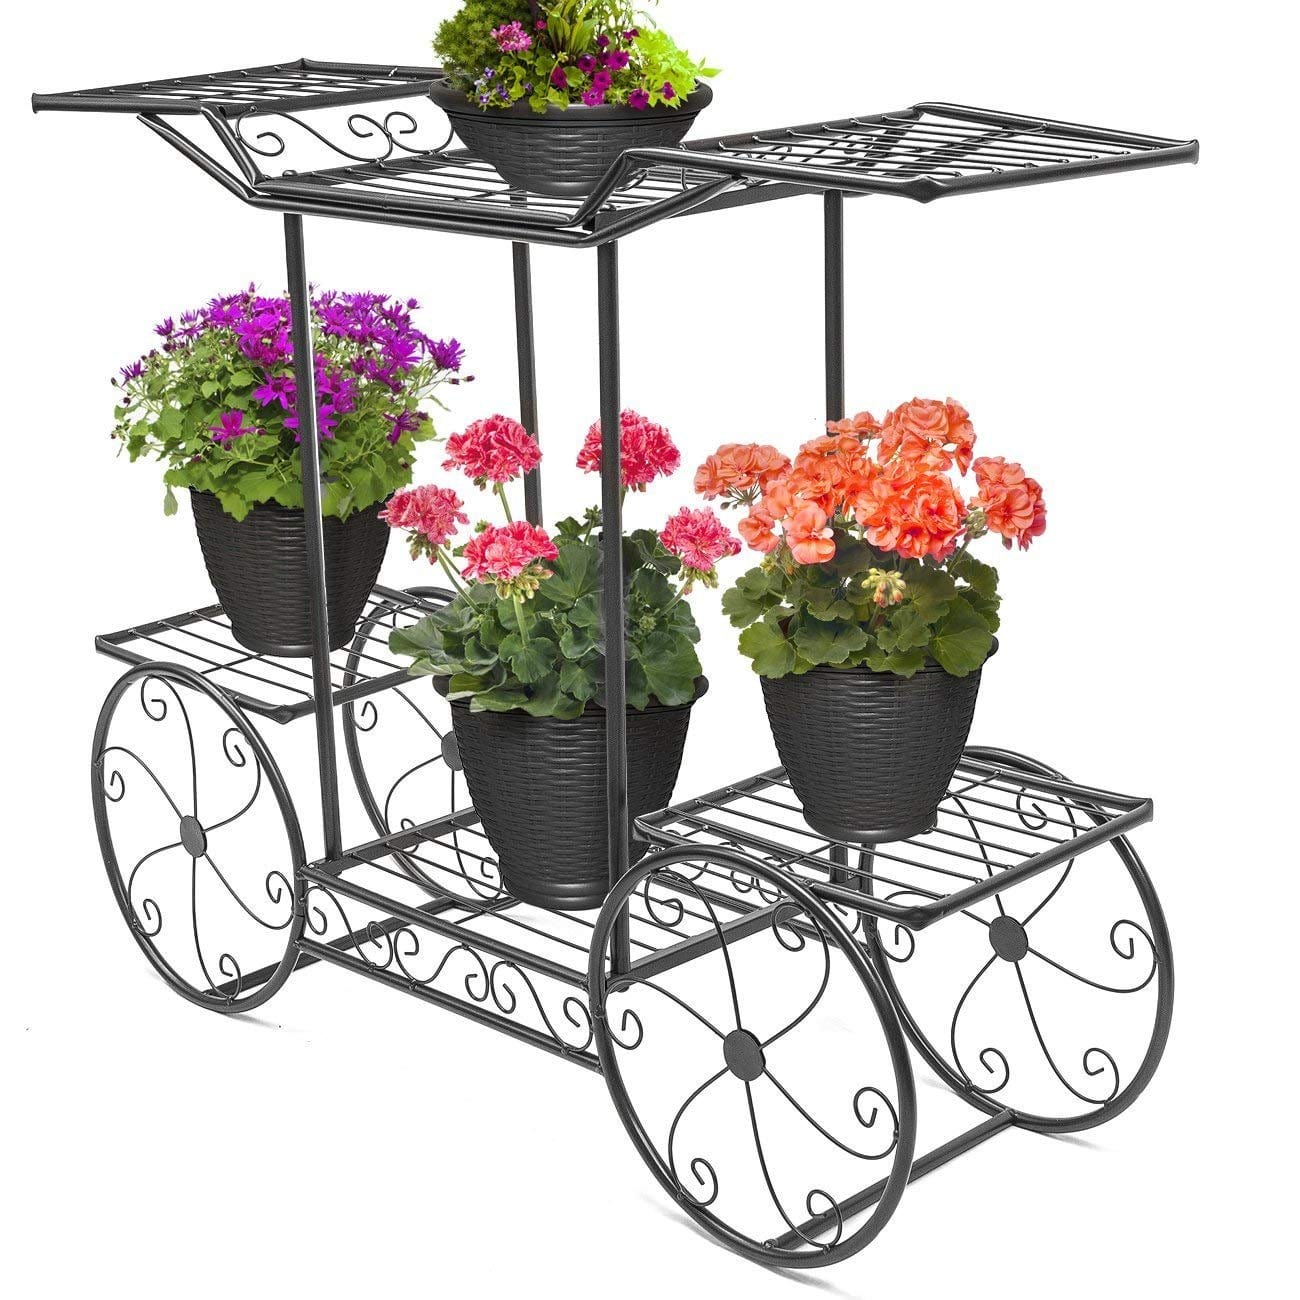 40-in H x 12-in W Black Indoor/Outdoor Round Steel Plant Stand at Lowes.com